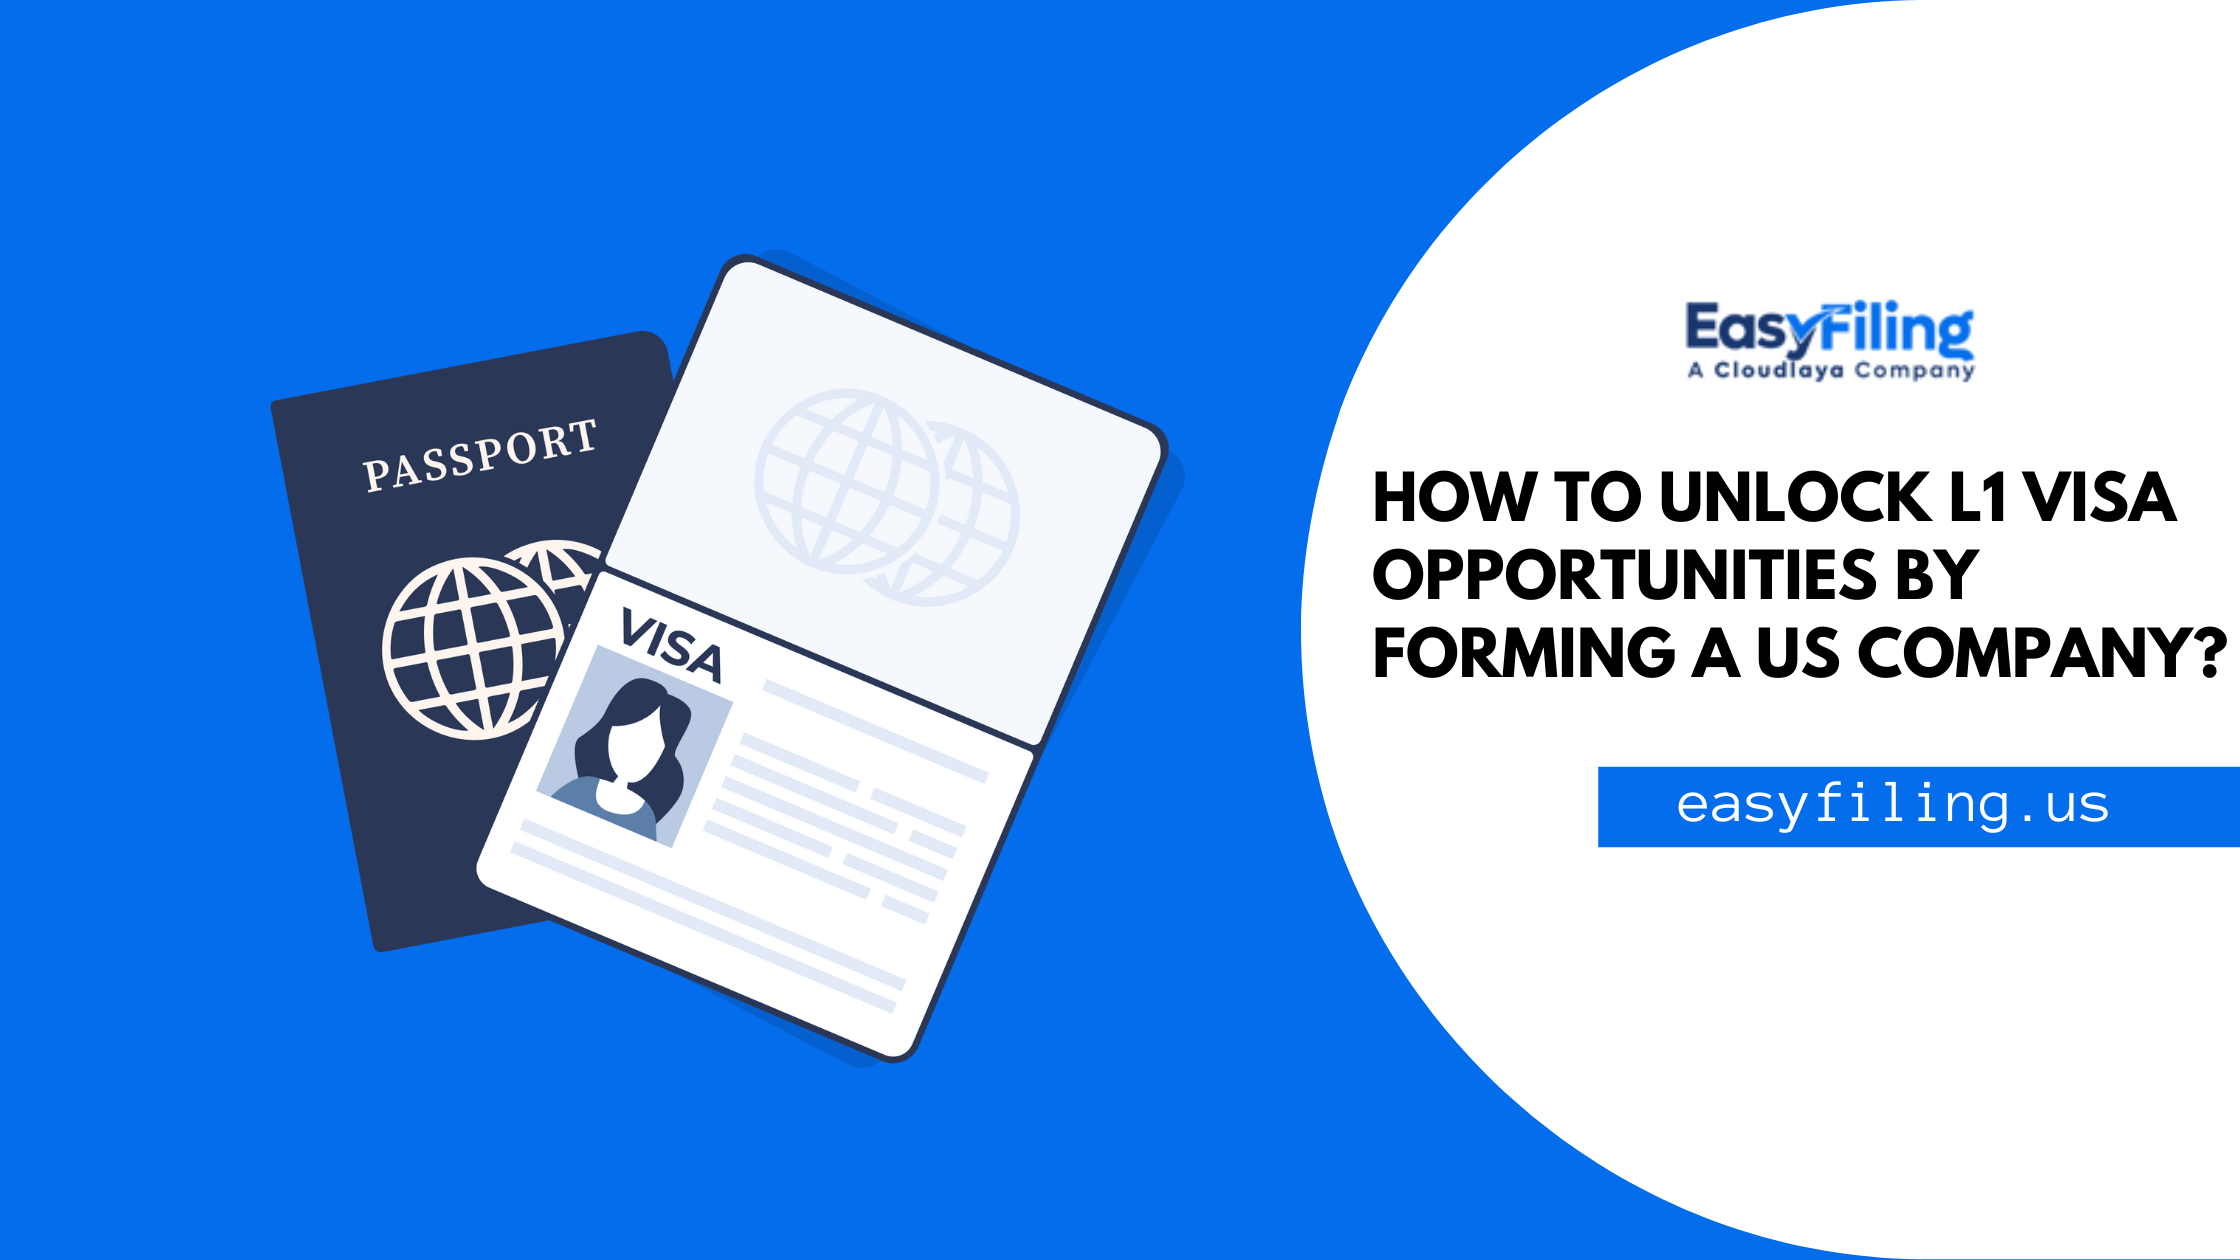 Unlock L1 Visa Opportunities by Forming a US Company